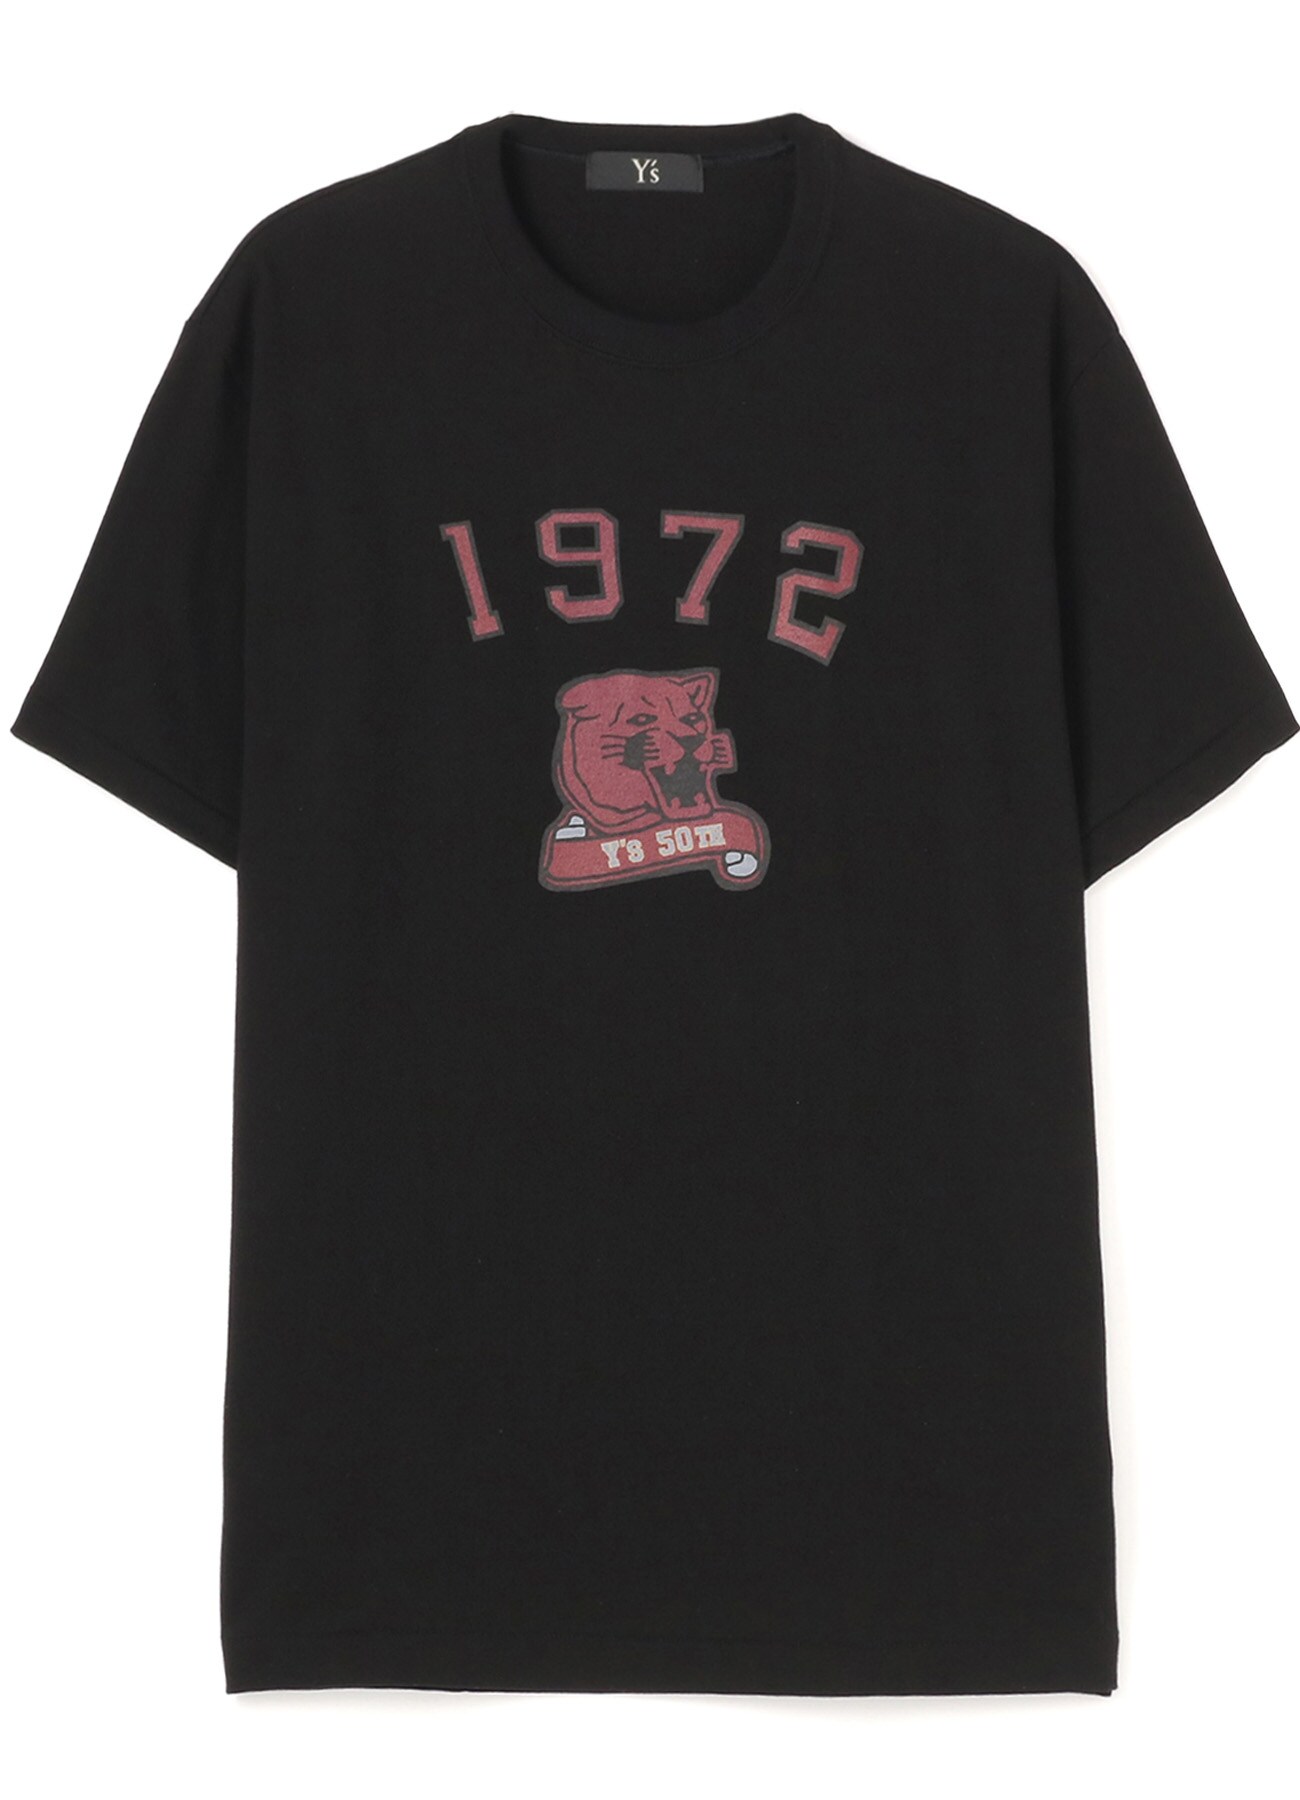 [Y's 1972 - Traditions] TIGER PIGMENT PRINT SHORT SLEEVE T